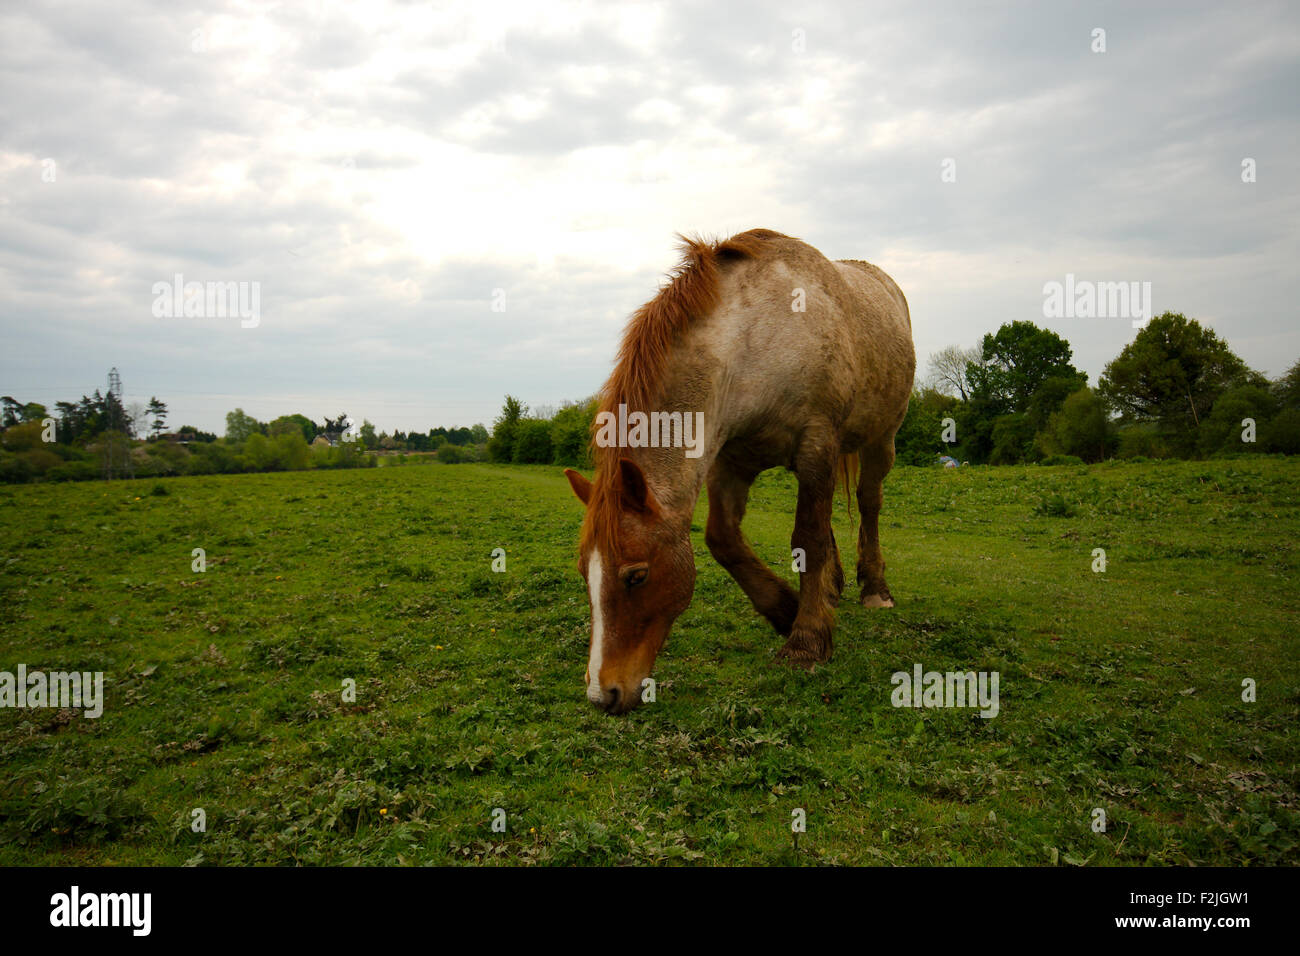 Brown, horse, head bowed, eating grass in a field taken front on from low down against cloudy sky Stock Photo